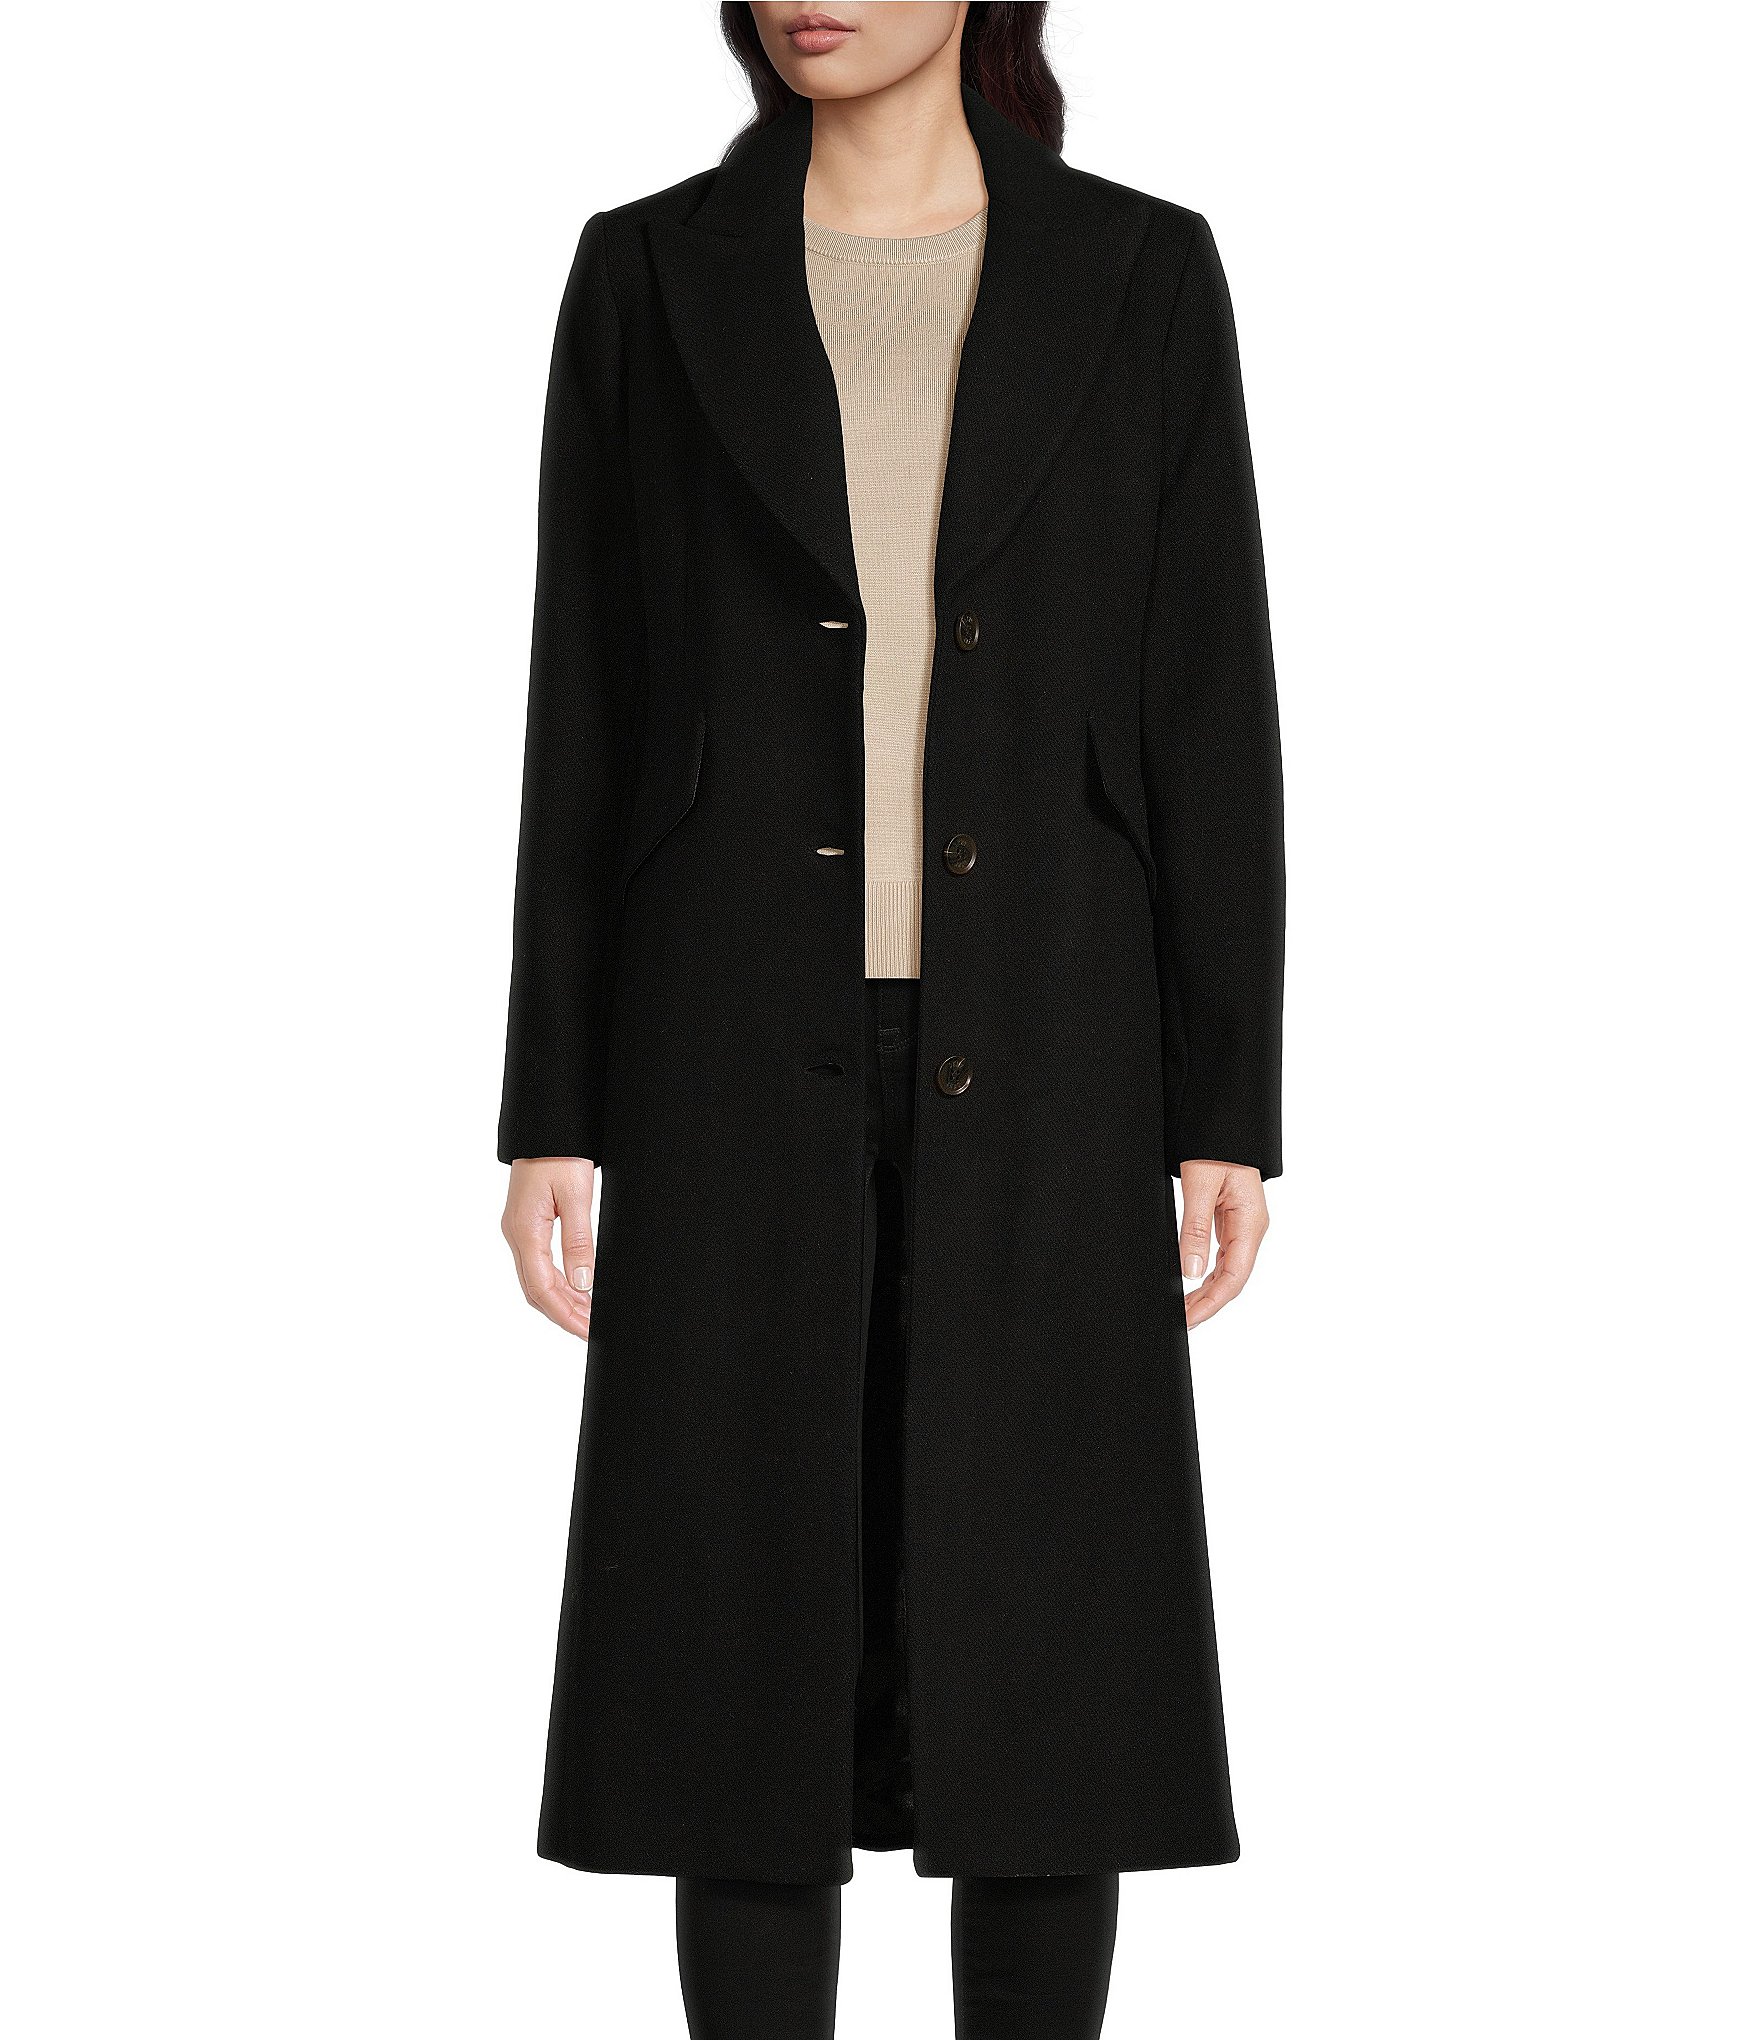 DKNY Single Breasted Notch Collar Wool Blend Button Front Coat | Dillard's